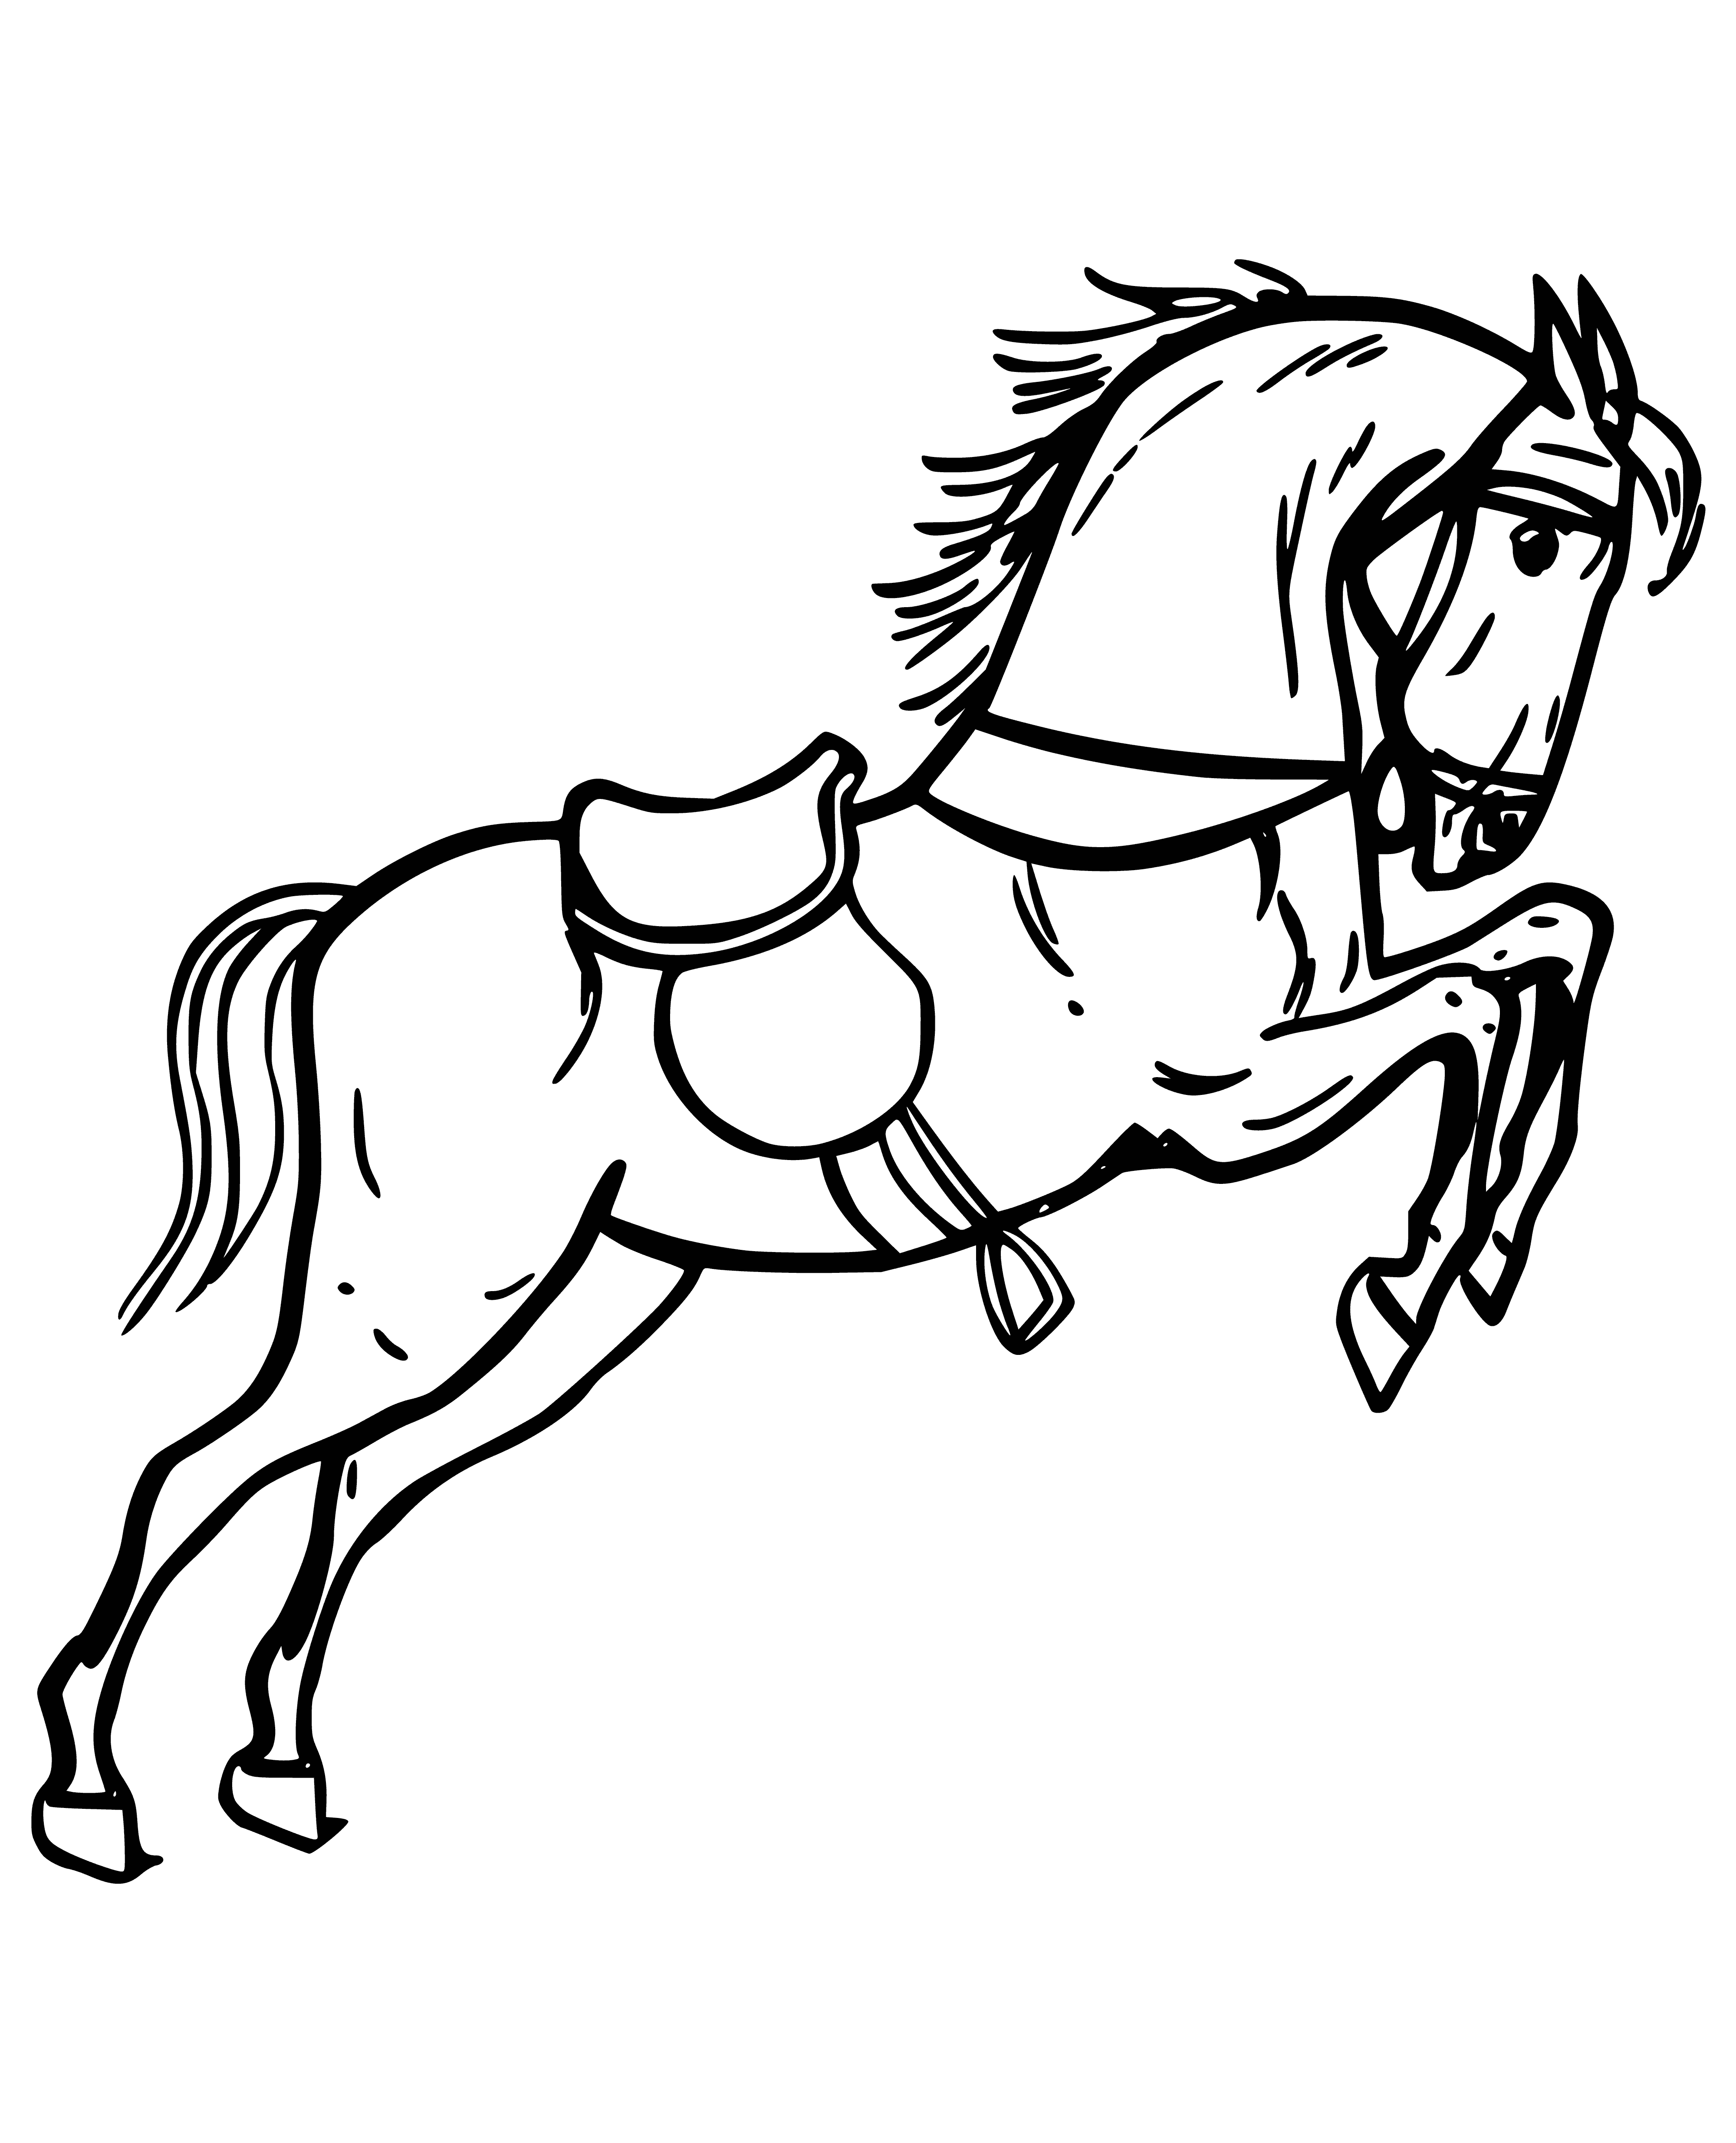 coloring page: Smokey gray horse w/ black spots, long neck, small head, dark eyes, pointy ears, long mane/tail, and black hooves.